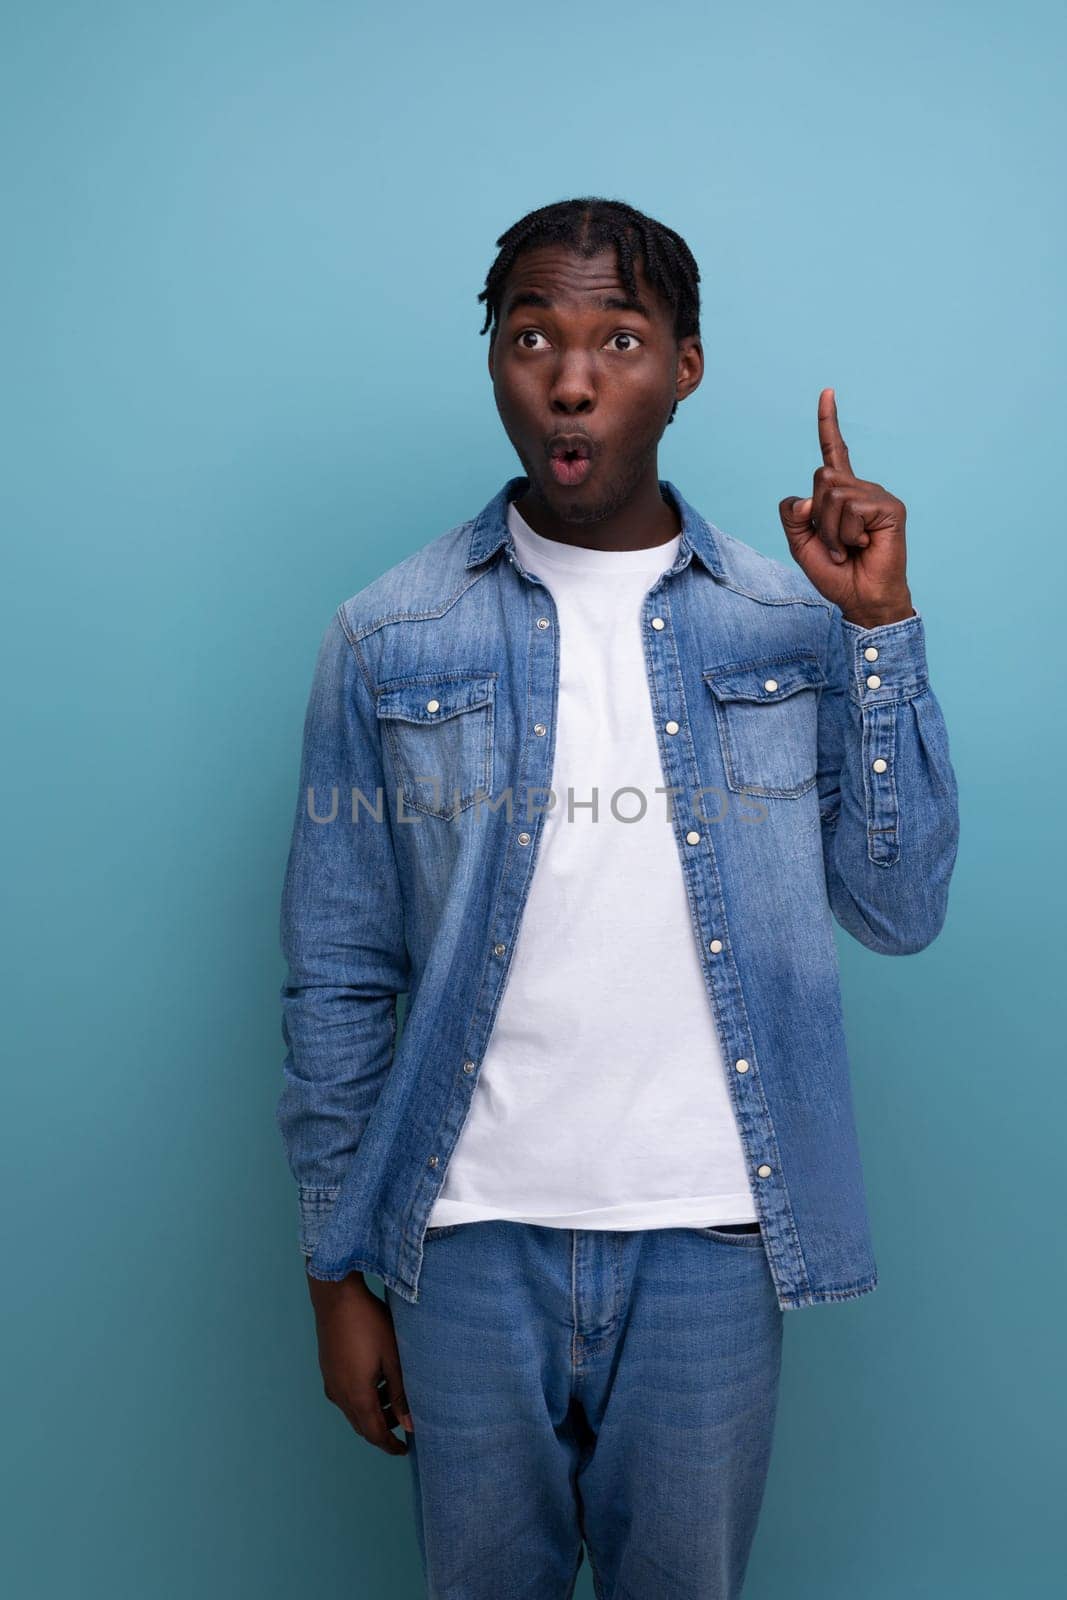 portrait of a surprised young cheerful american man with dreadlocks in a denim jacket.